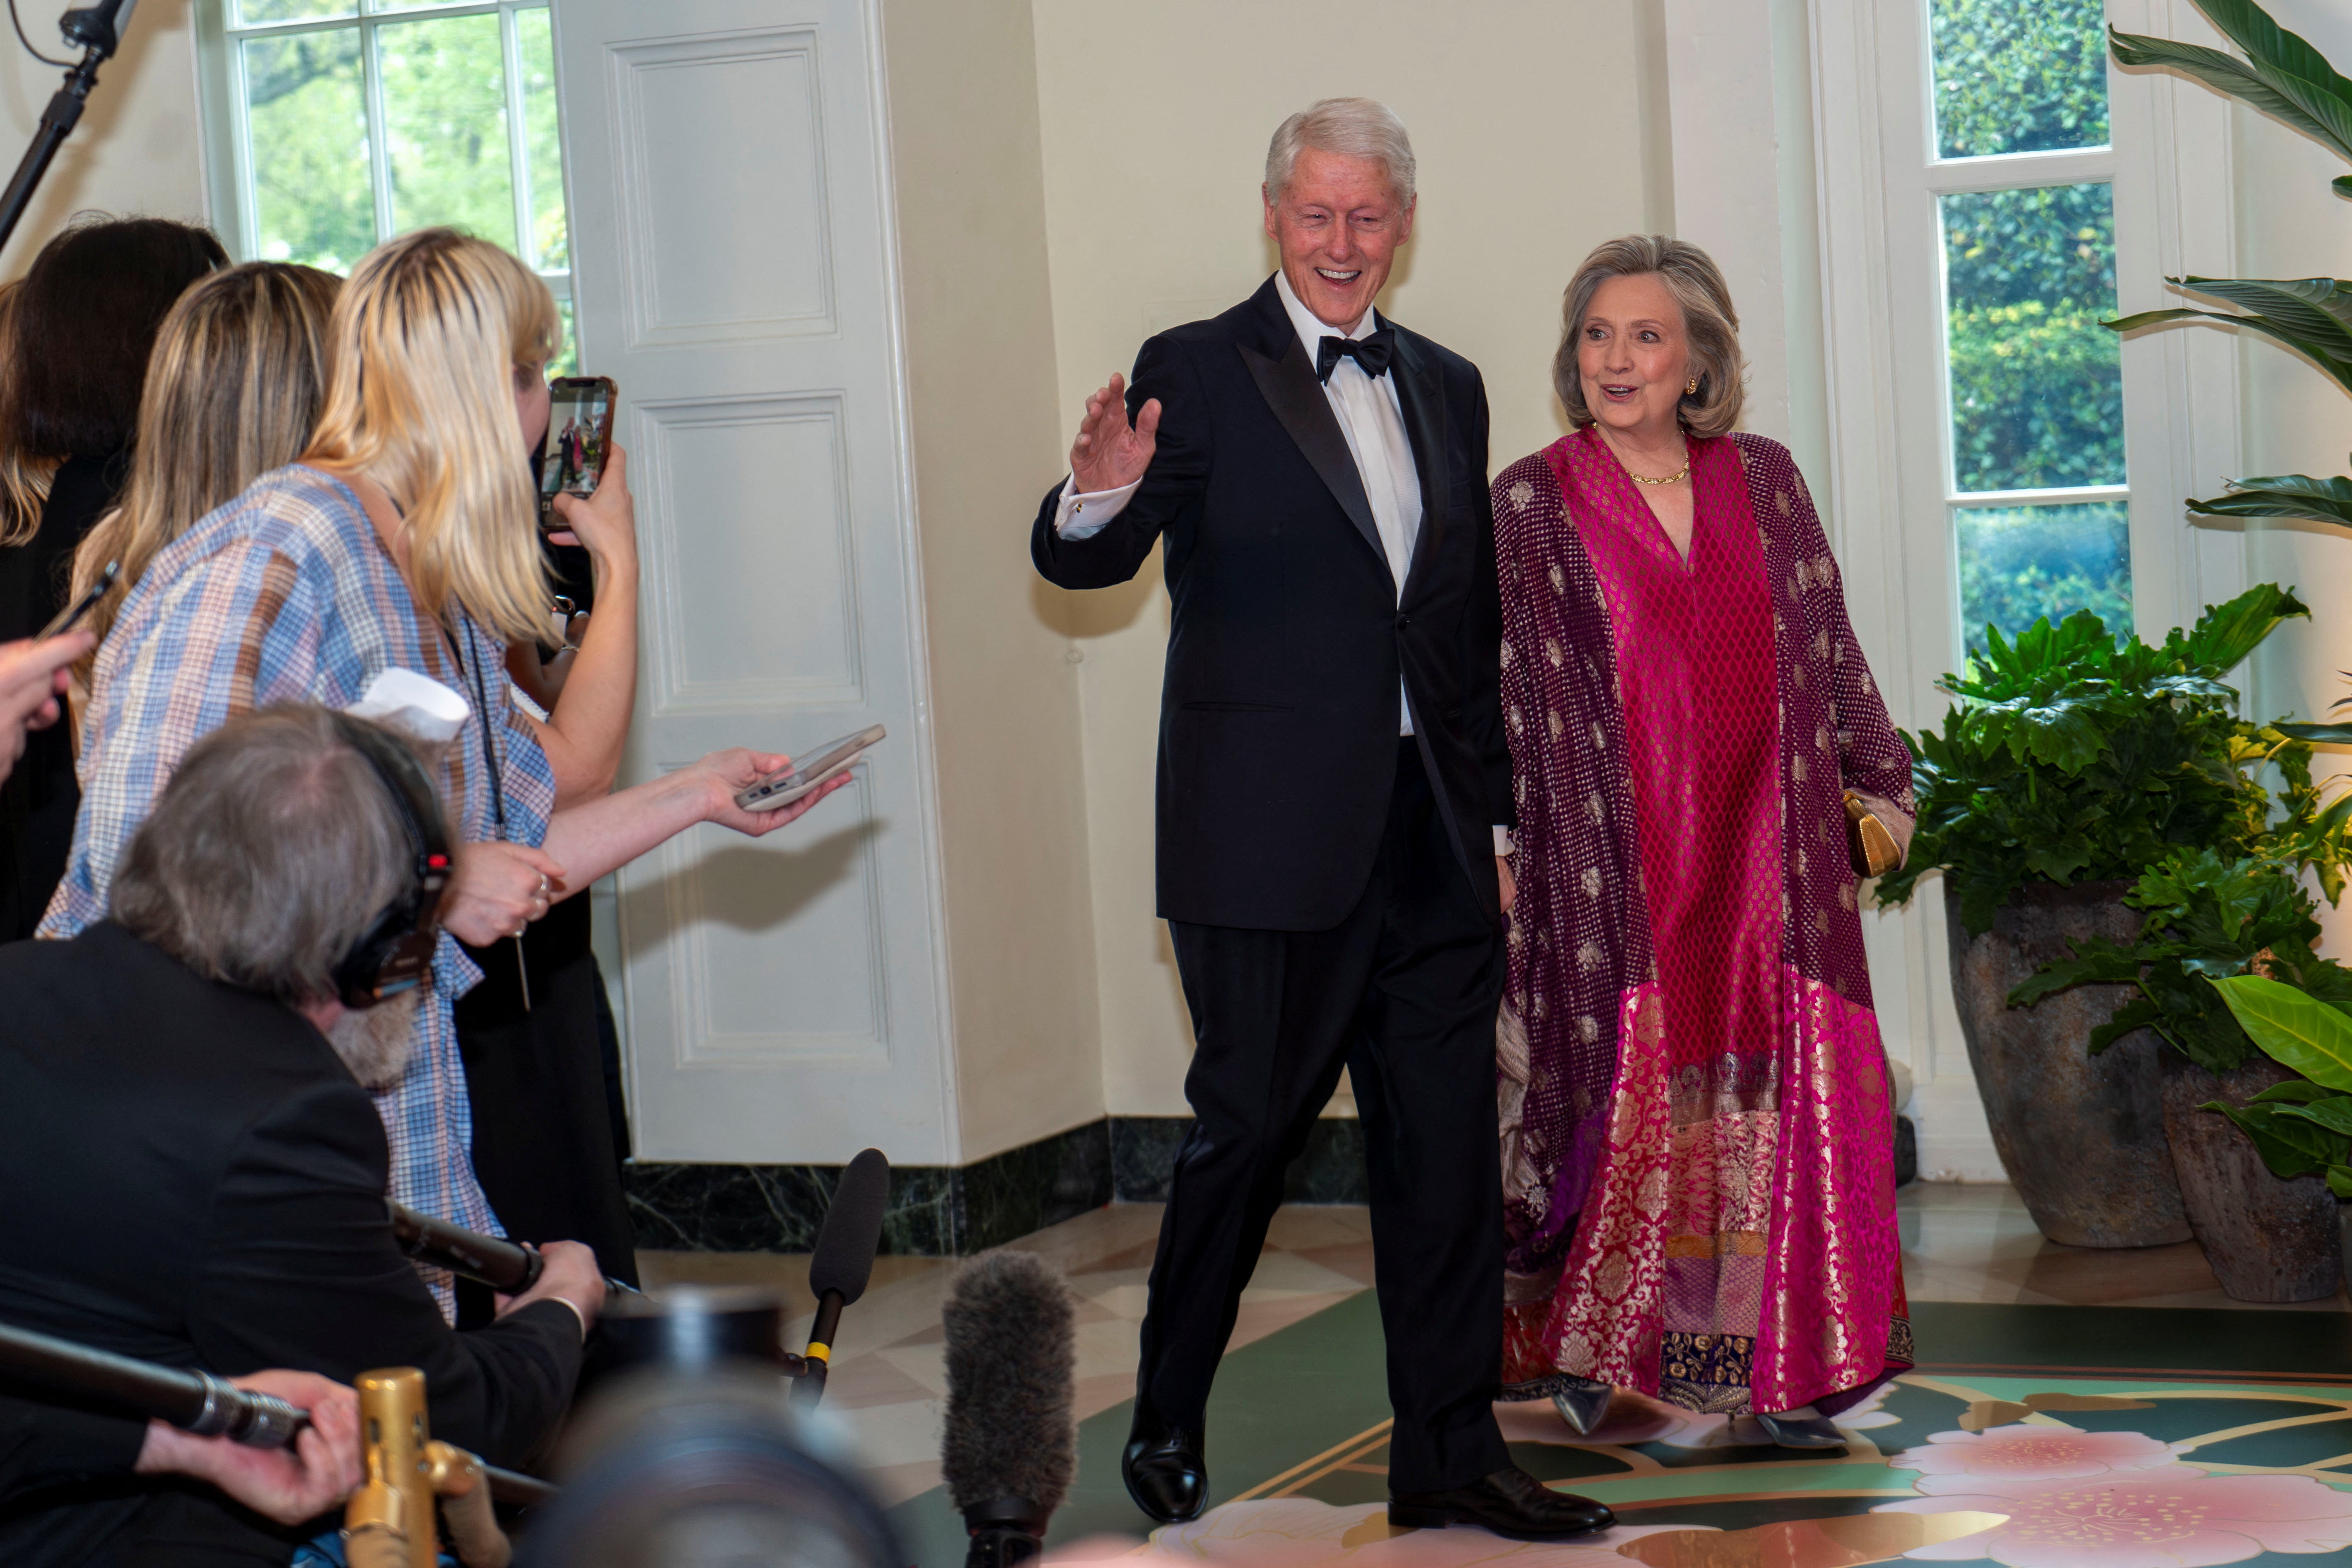 Former president Bill Clinton and former secretary of state Hillary Clinton made it to the top table